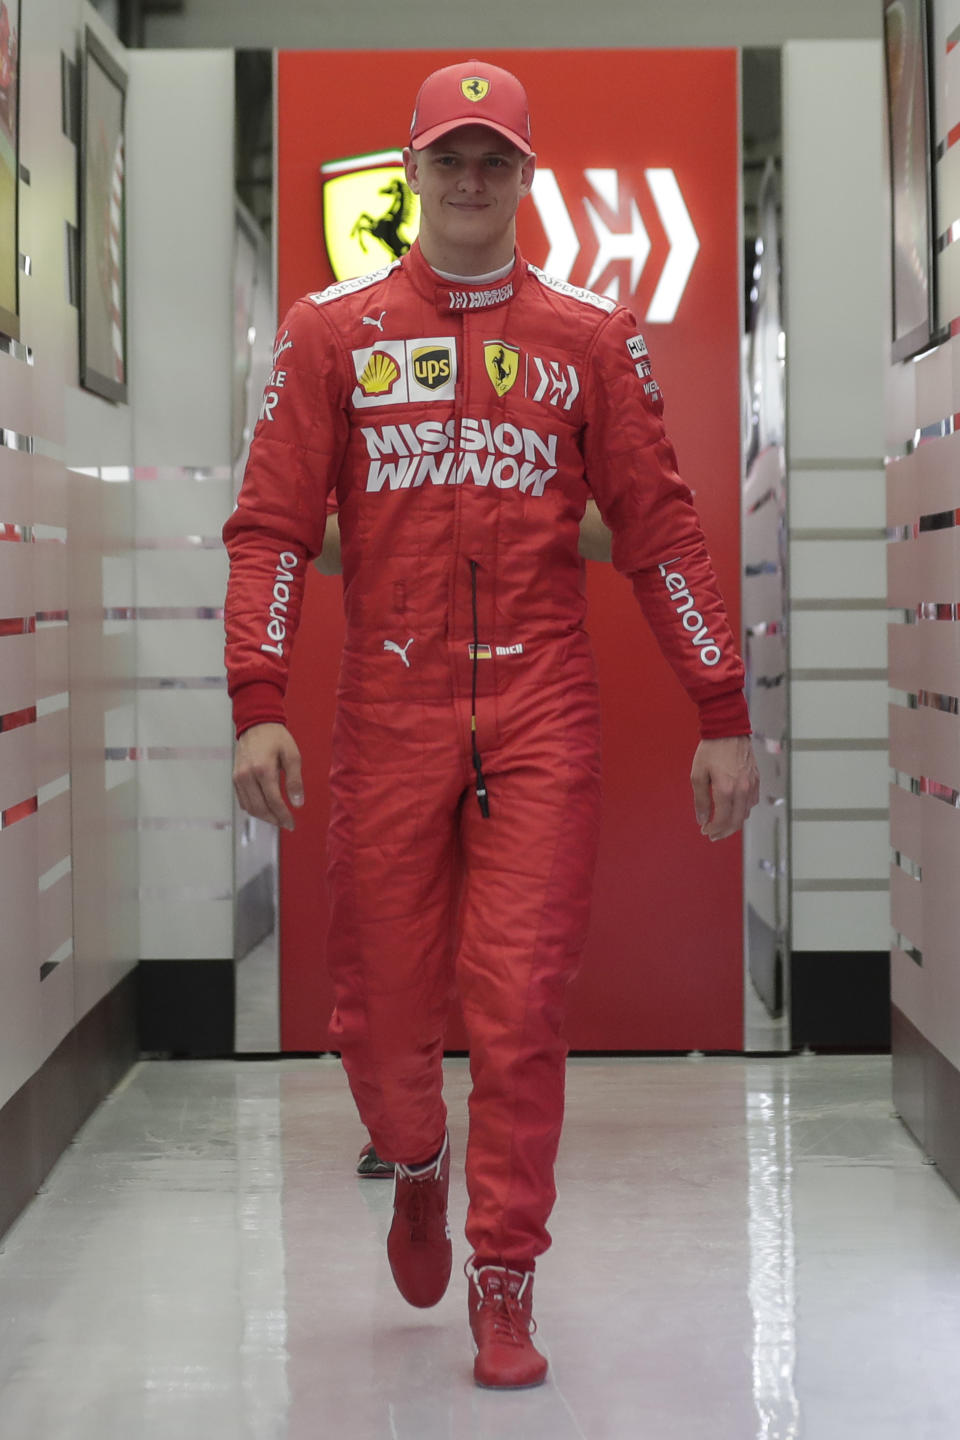 Mick Schumacher leaves Ferrari garage during his first F1 test for Ferrari at the Bahrain International Circuit in Sakhir, Bahrain, Tuesday, April 2, 2019. Mick Schumacher has moved closer to emulating his father Michael by driving a Ferrari Formula One car in an official test. Schumacher's father won seven F1 titles, five of those with Ferrari and holds the record for race wins with 91. (AP Photo/Hassan Ammar)